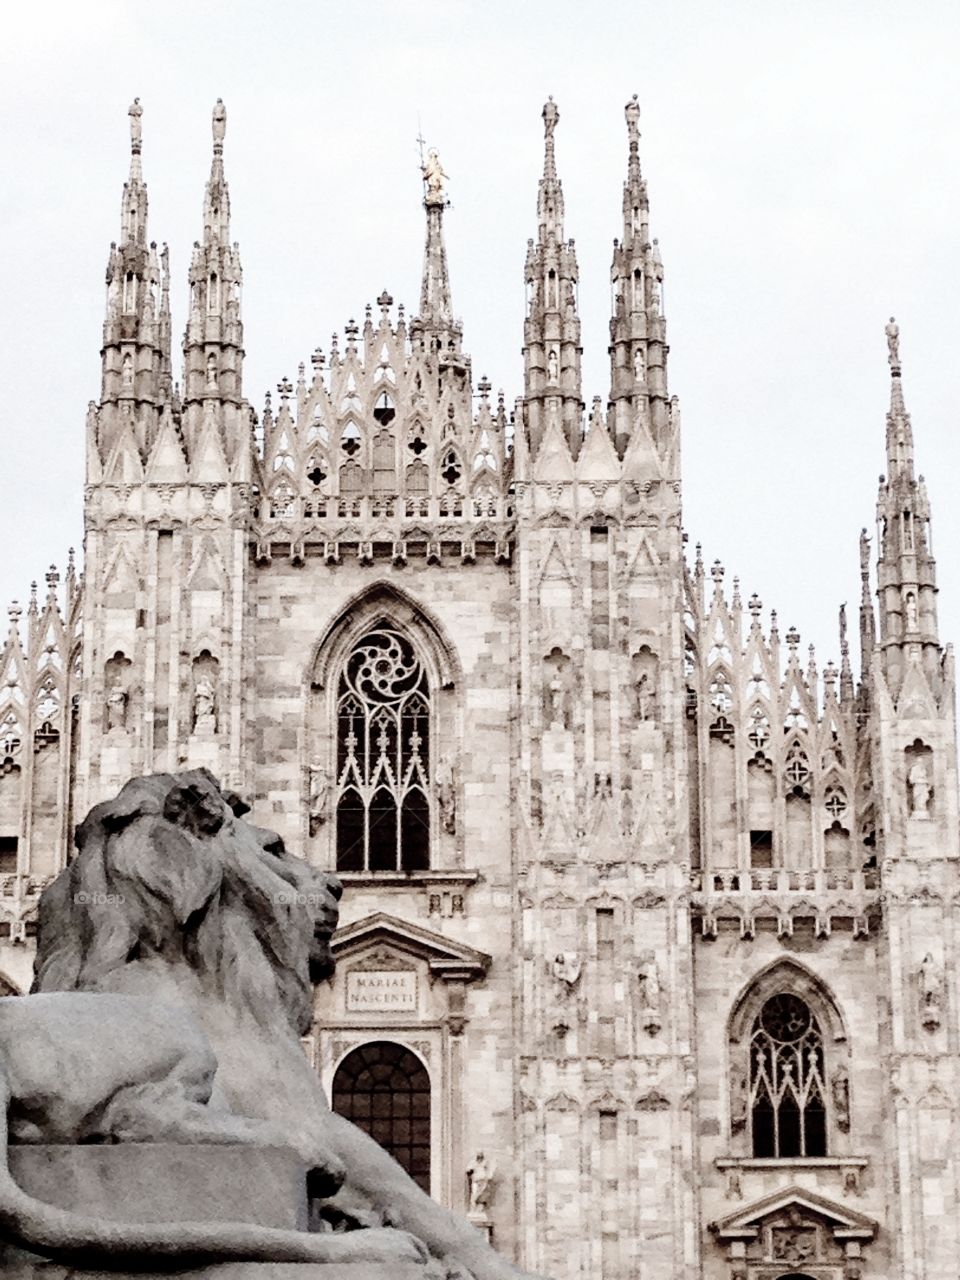 A lion watching over the duomo in Milan